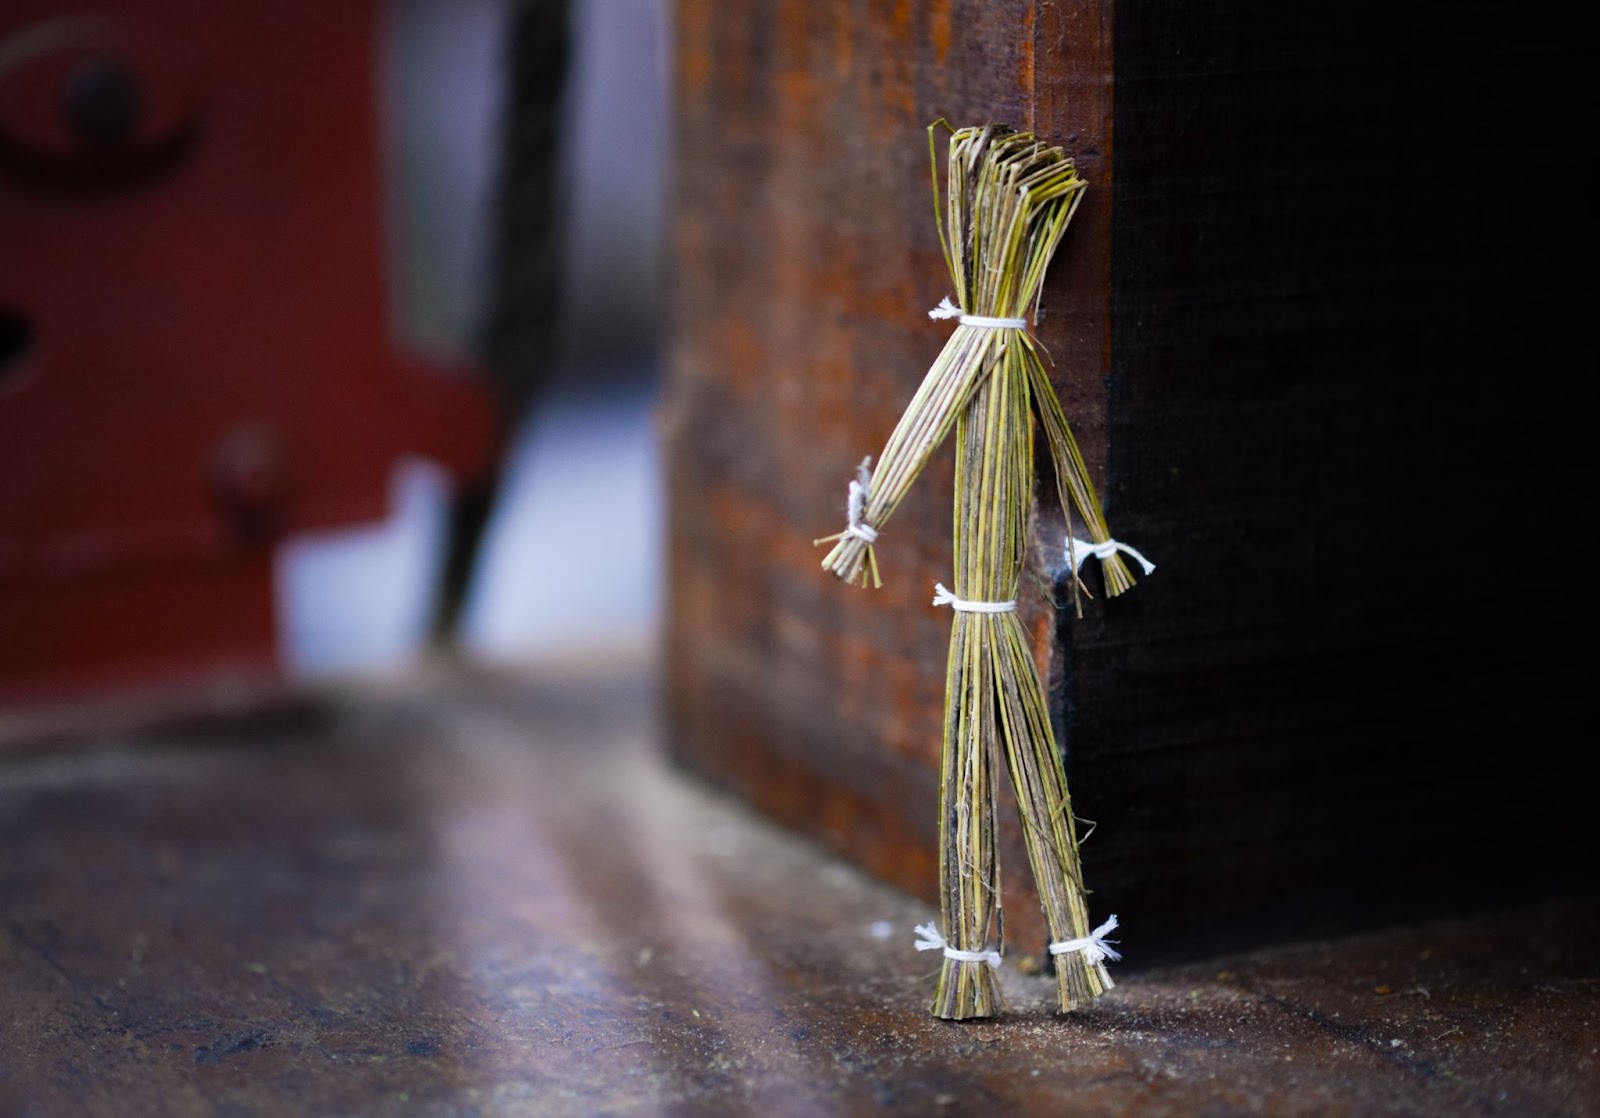 A fragile-looking figure made of straw, tied together by string.